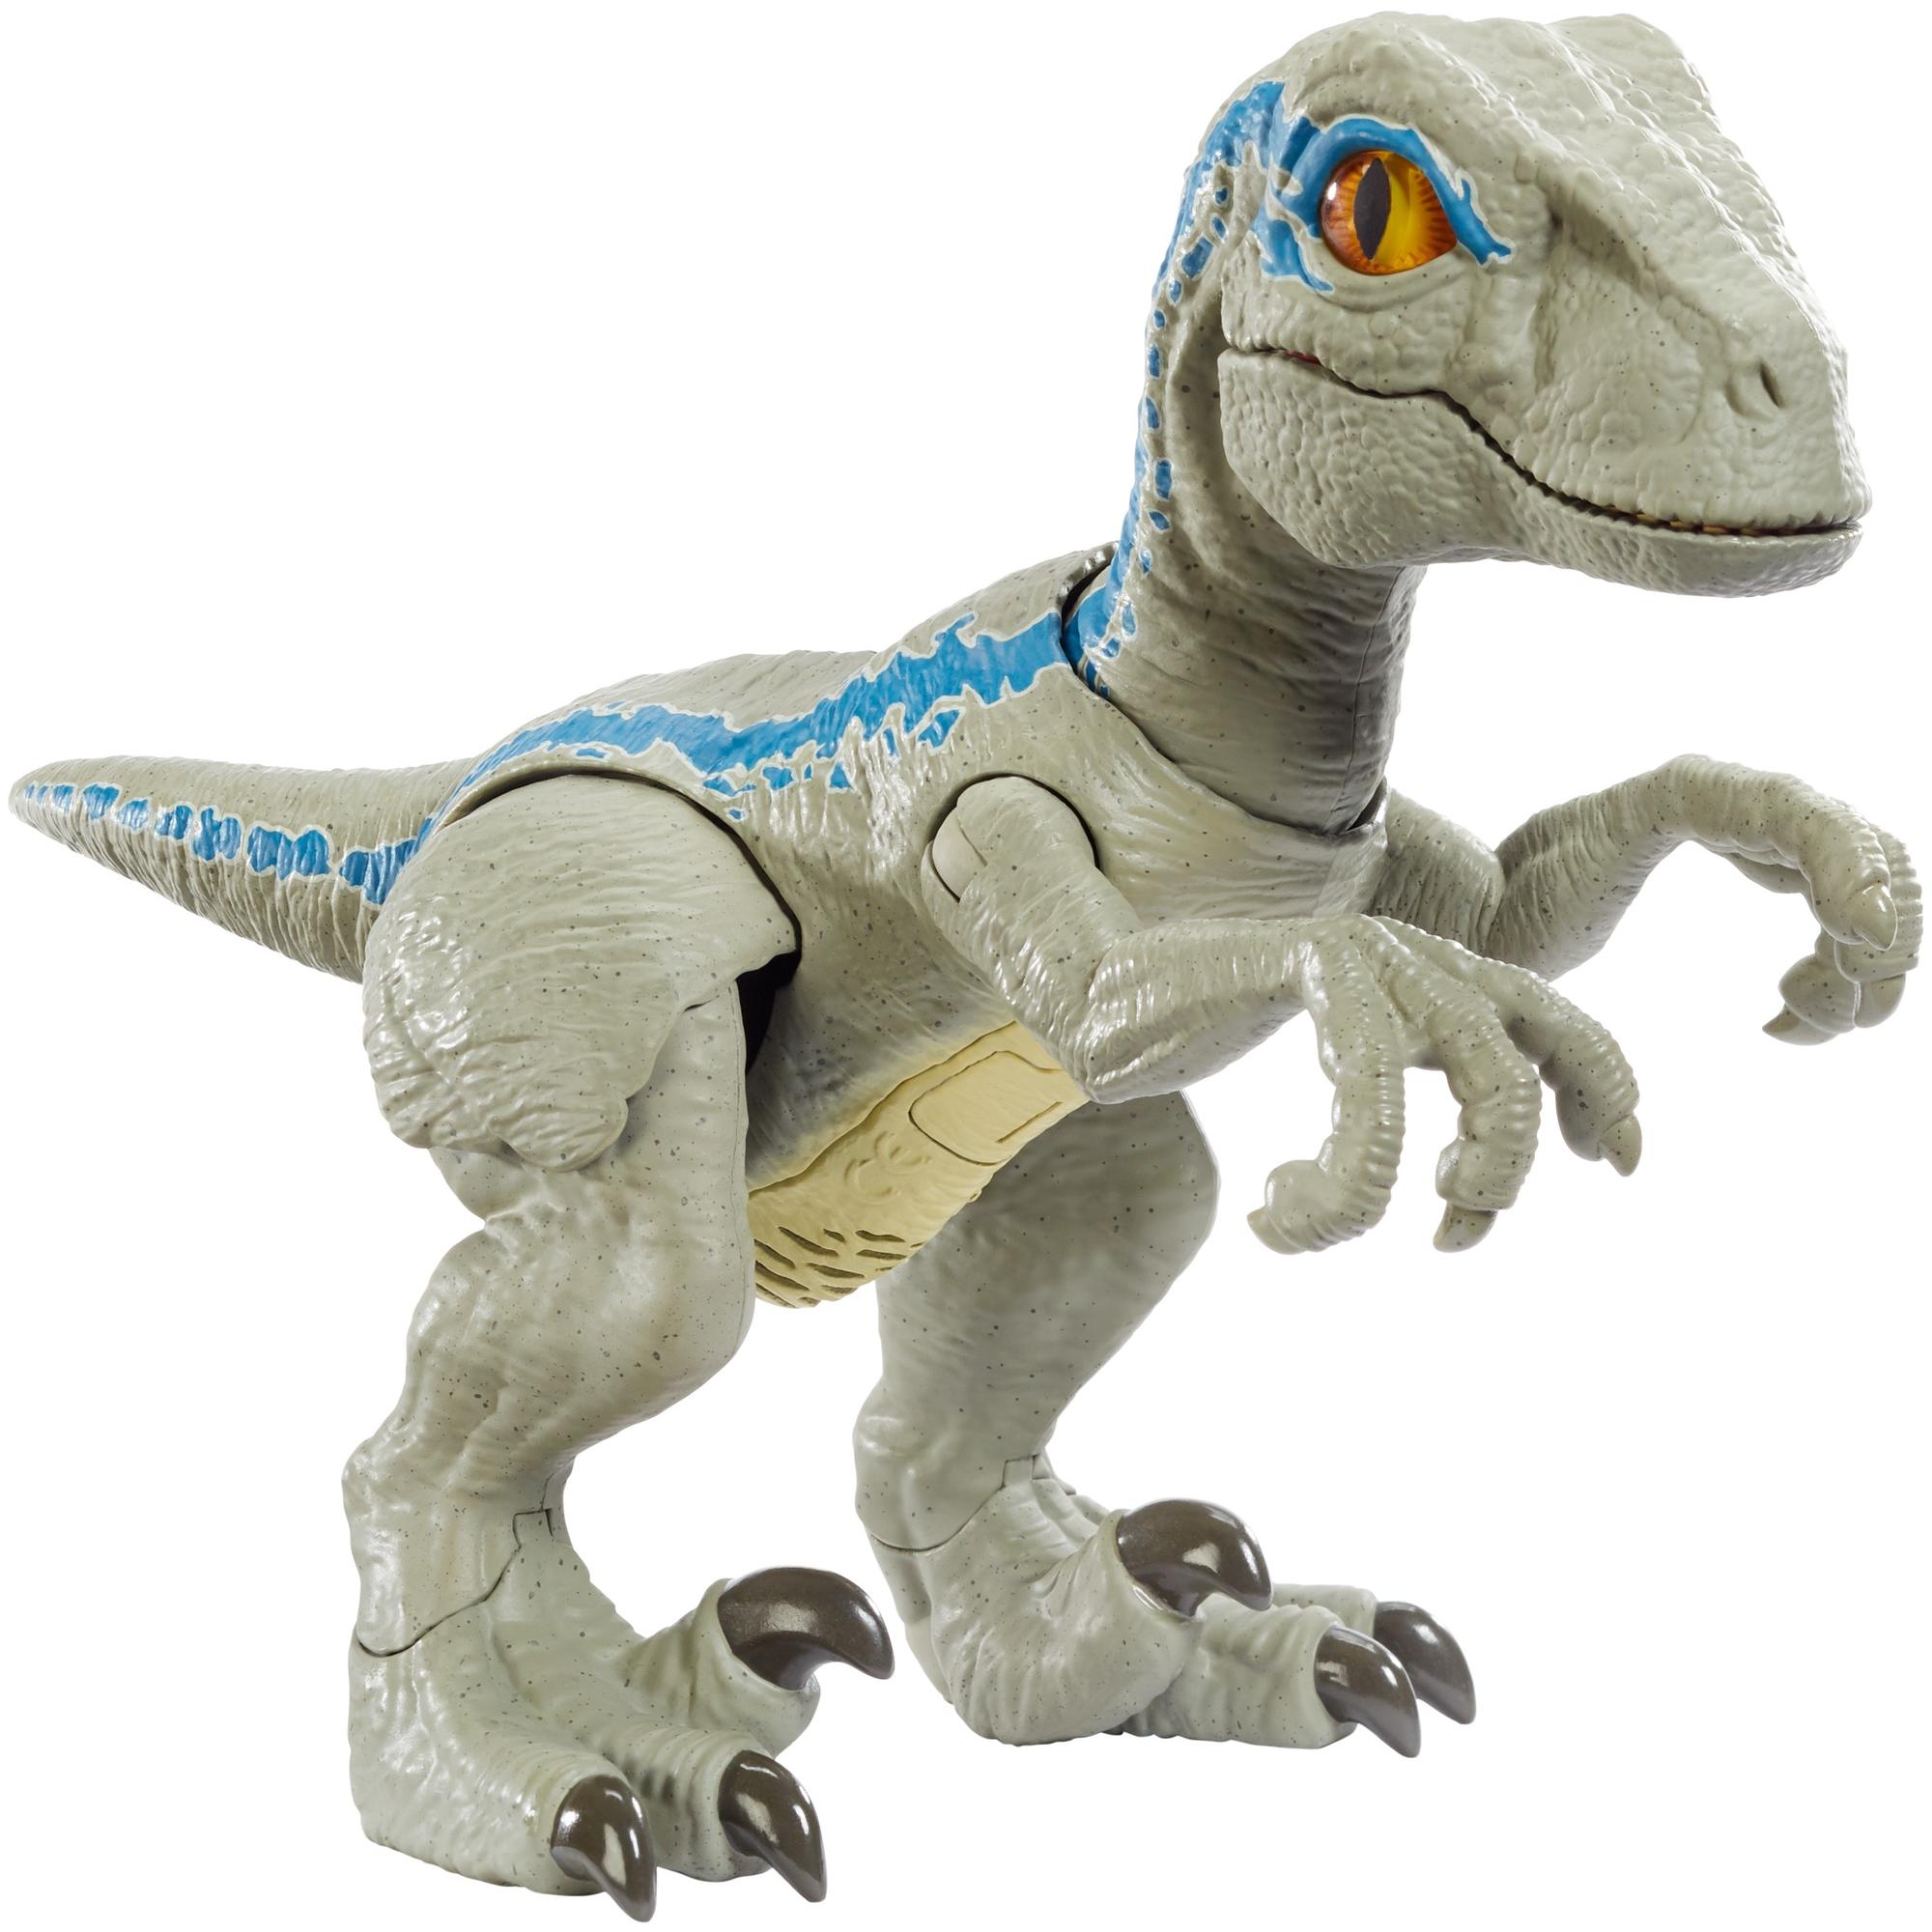 Jurassic World Primal Pal Blue With Spring-Moving Action, Sound Effects And Articulation - image 1 of 8